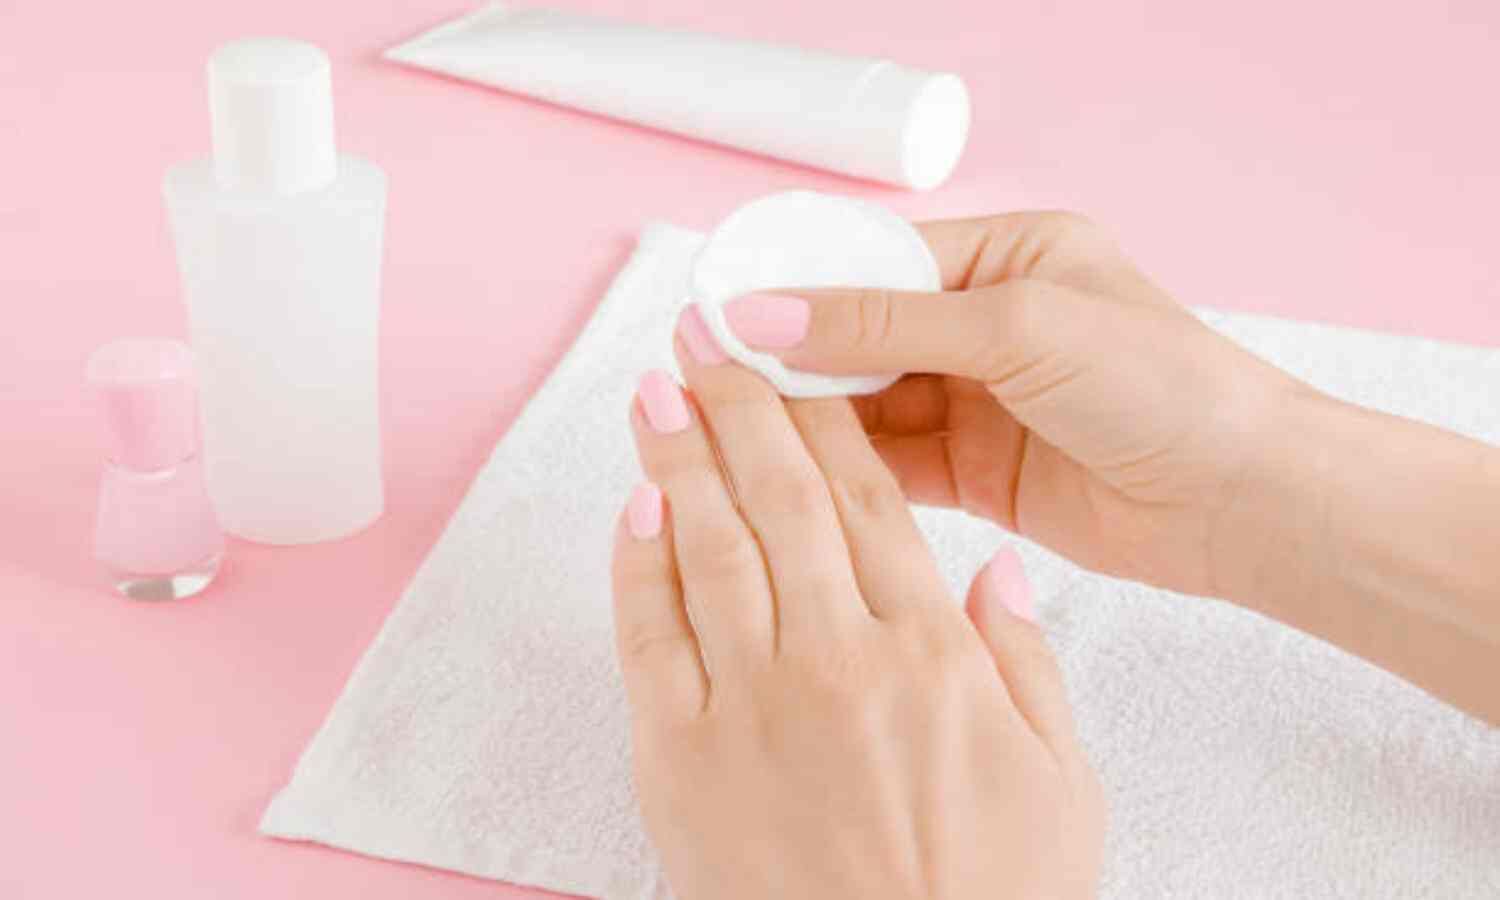 Nail Paint Remover Tips: Without Nail Paint Remover You Can Remove Nail Polish By These Simple Ways